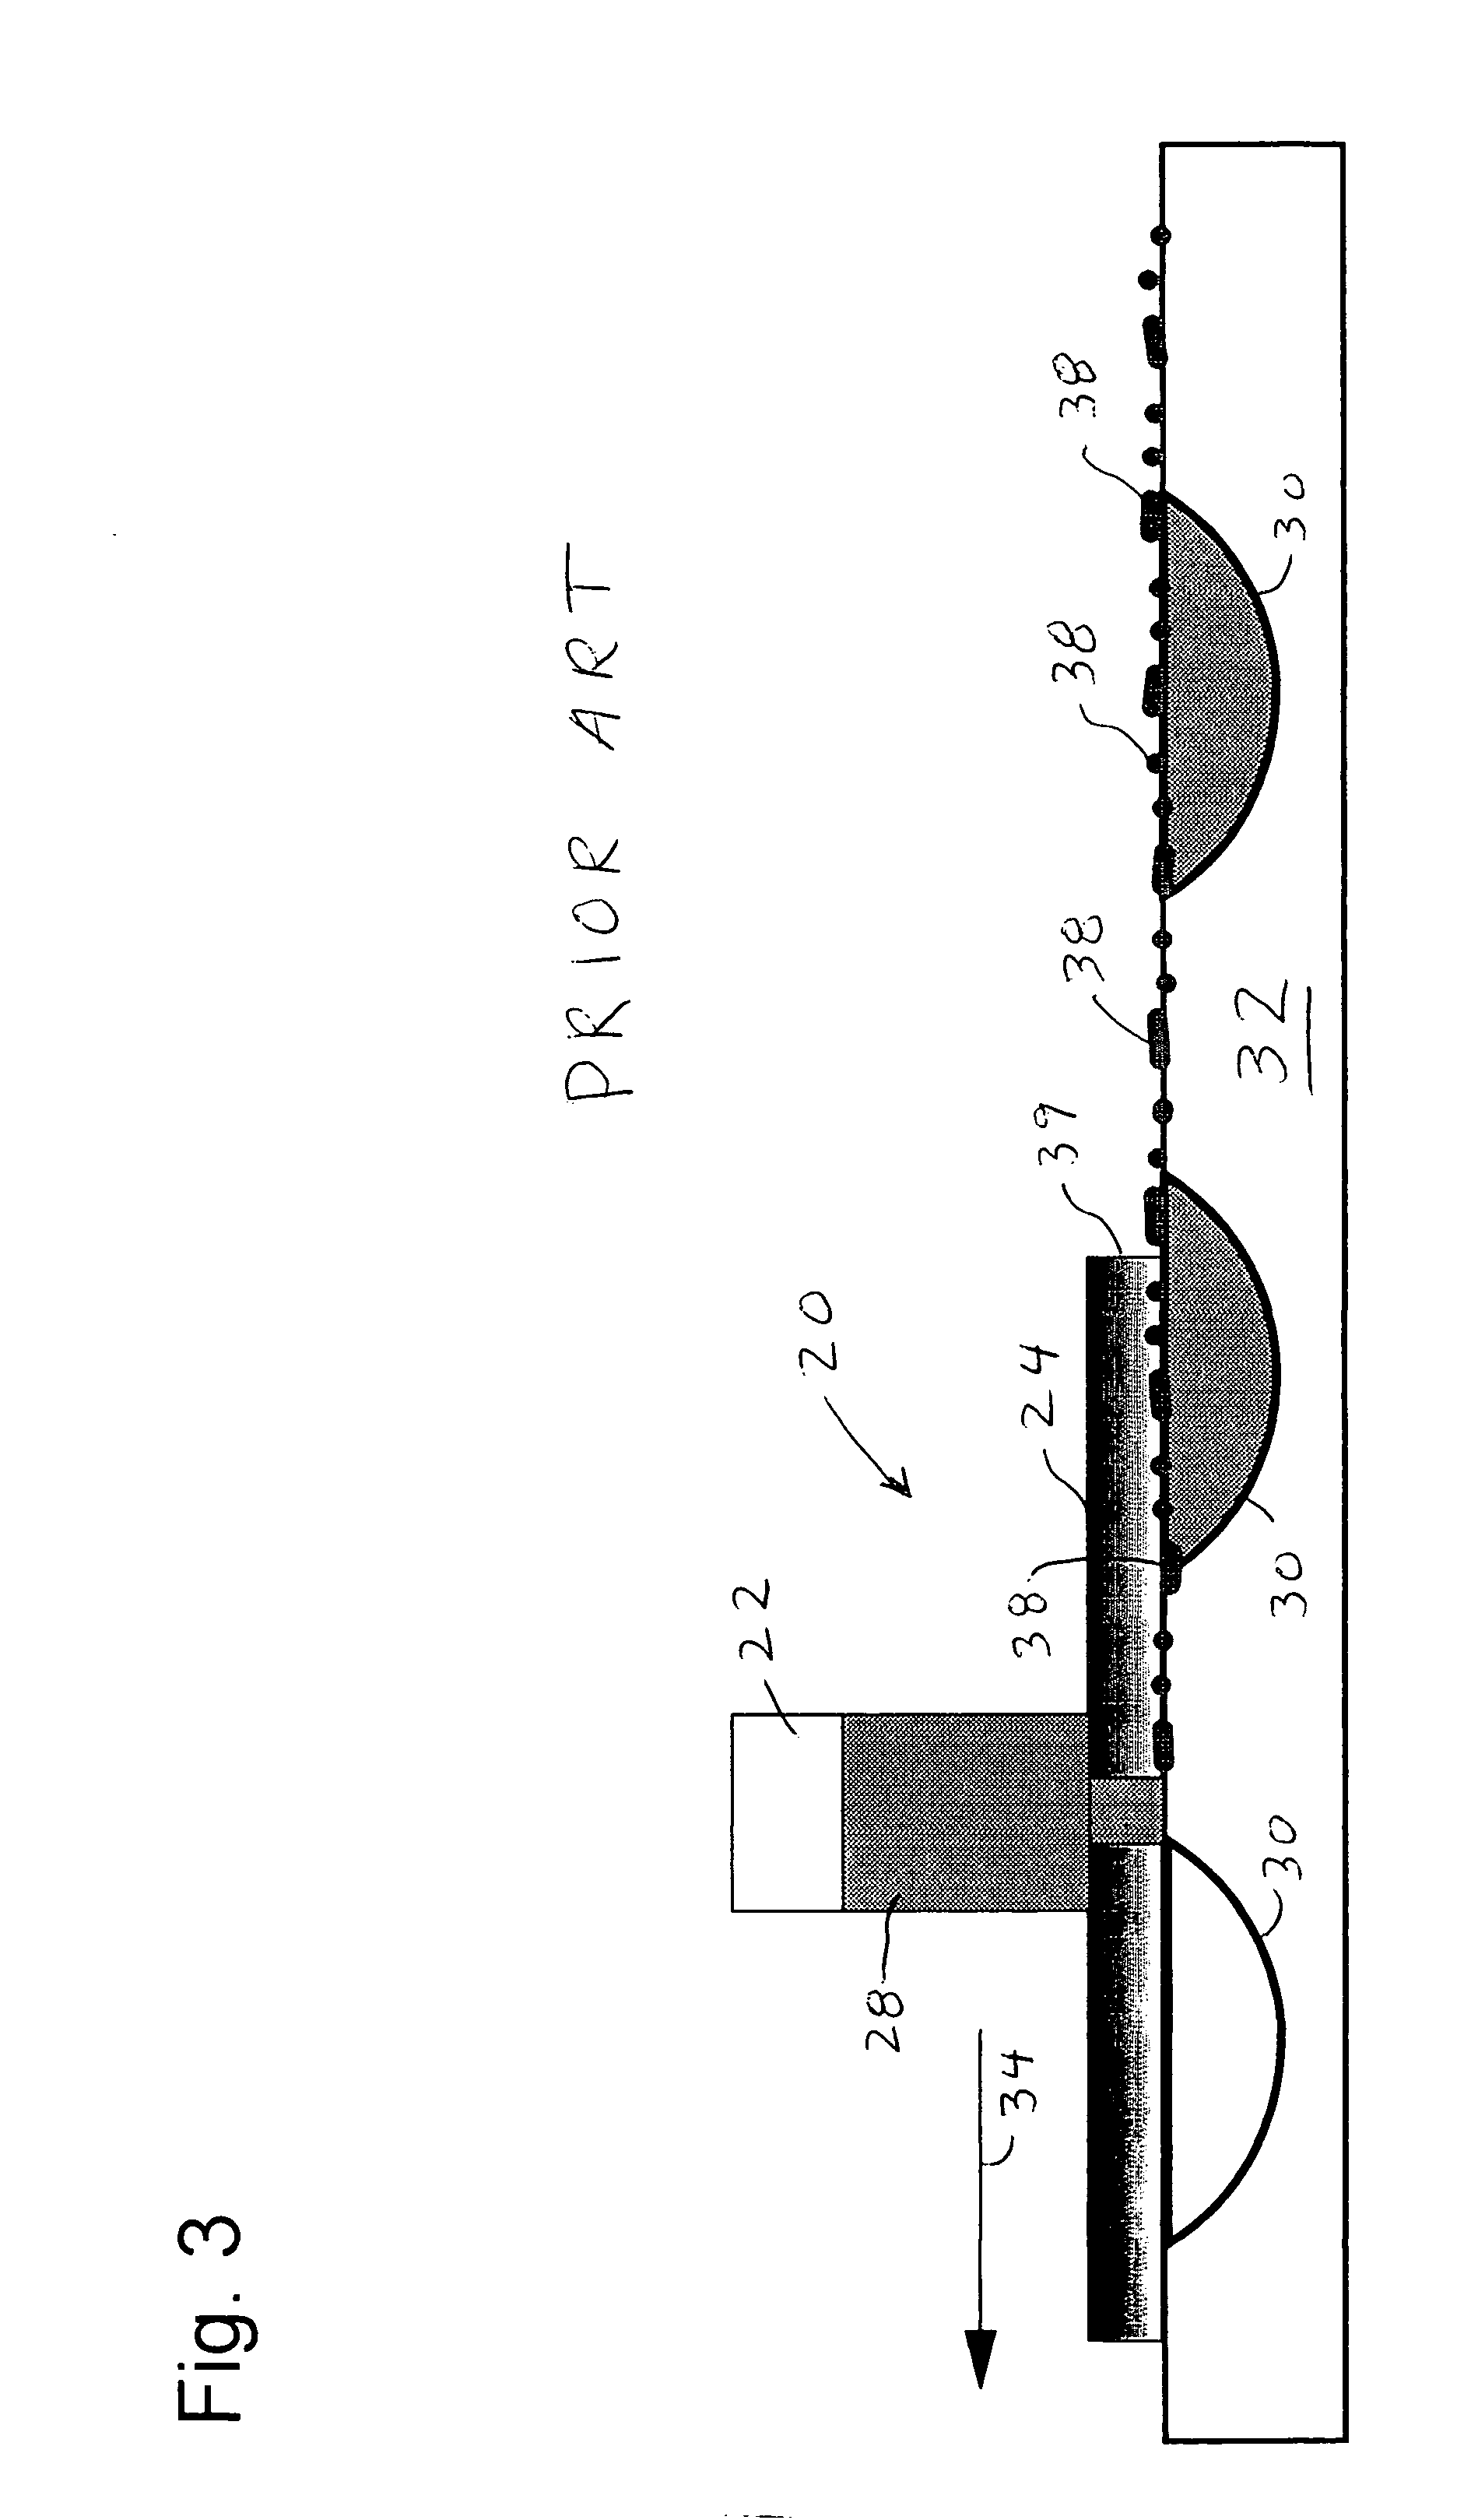 Injection molded continuously solidified solder method and apparatus